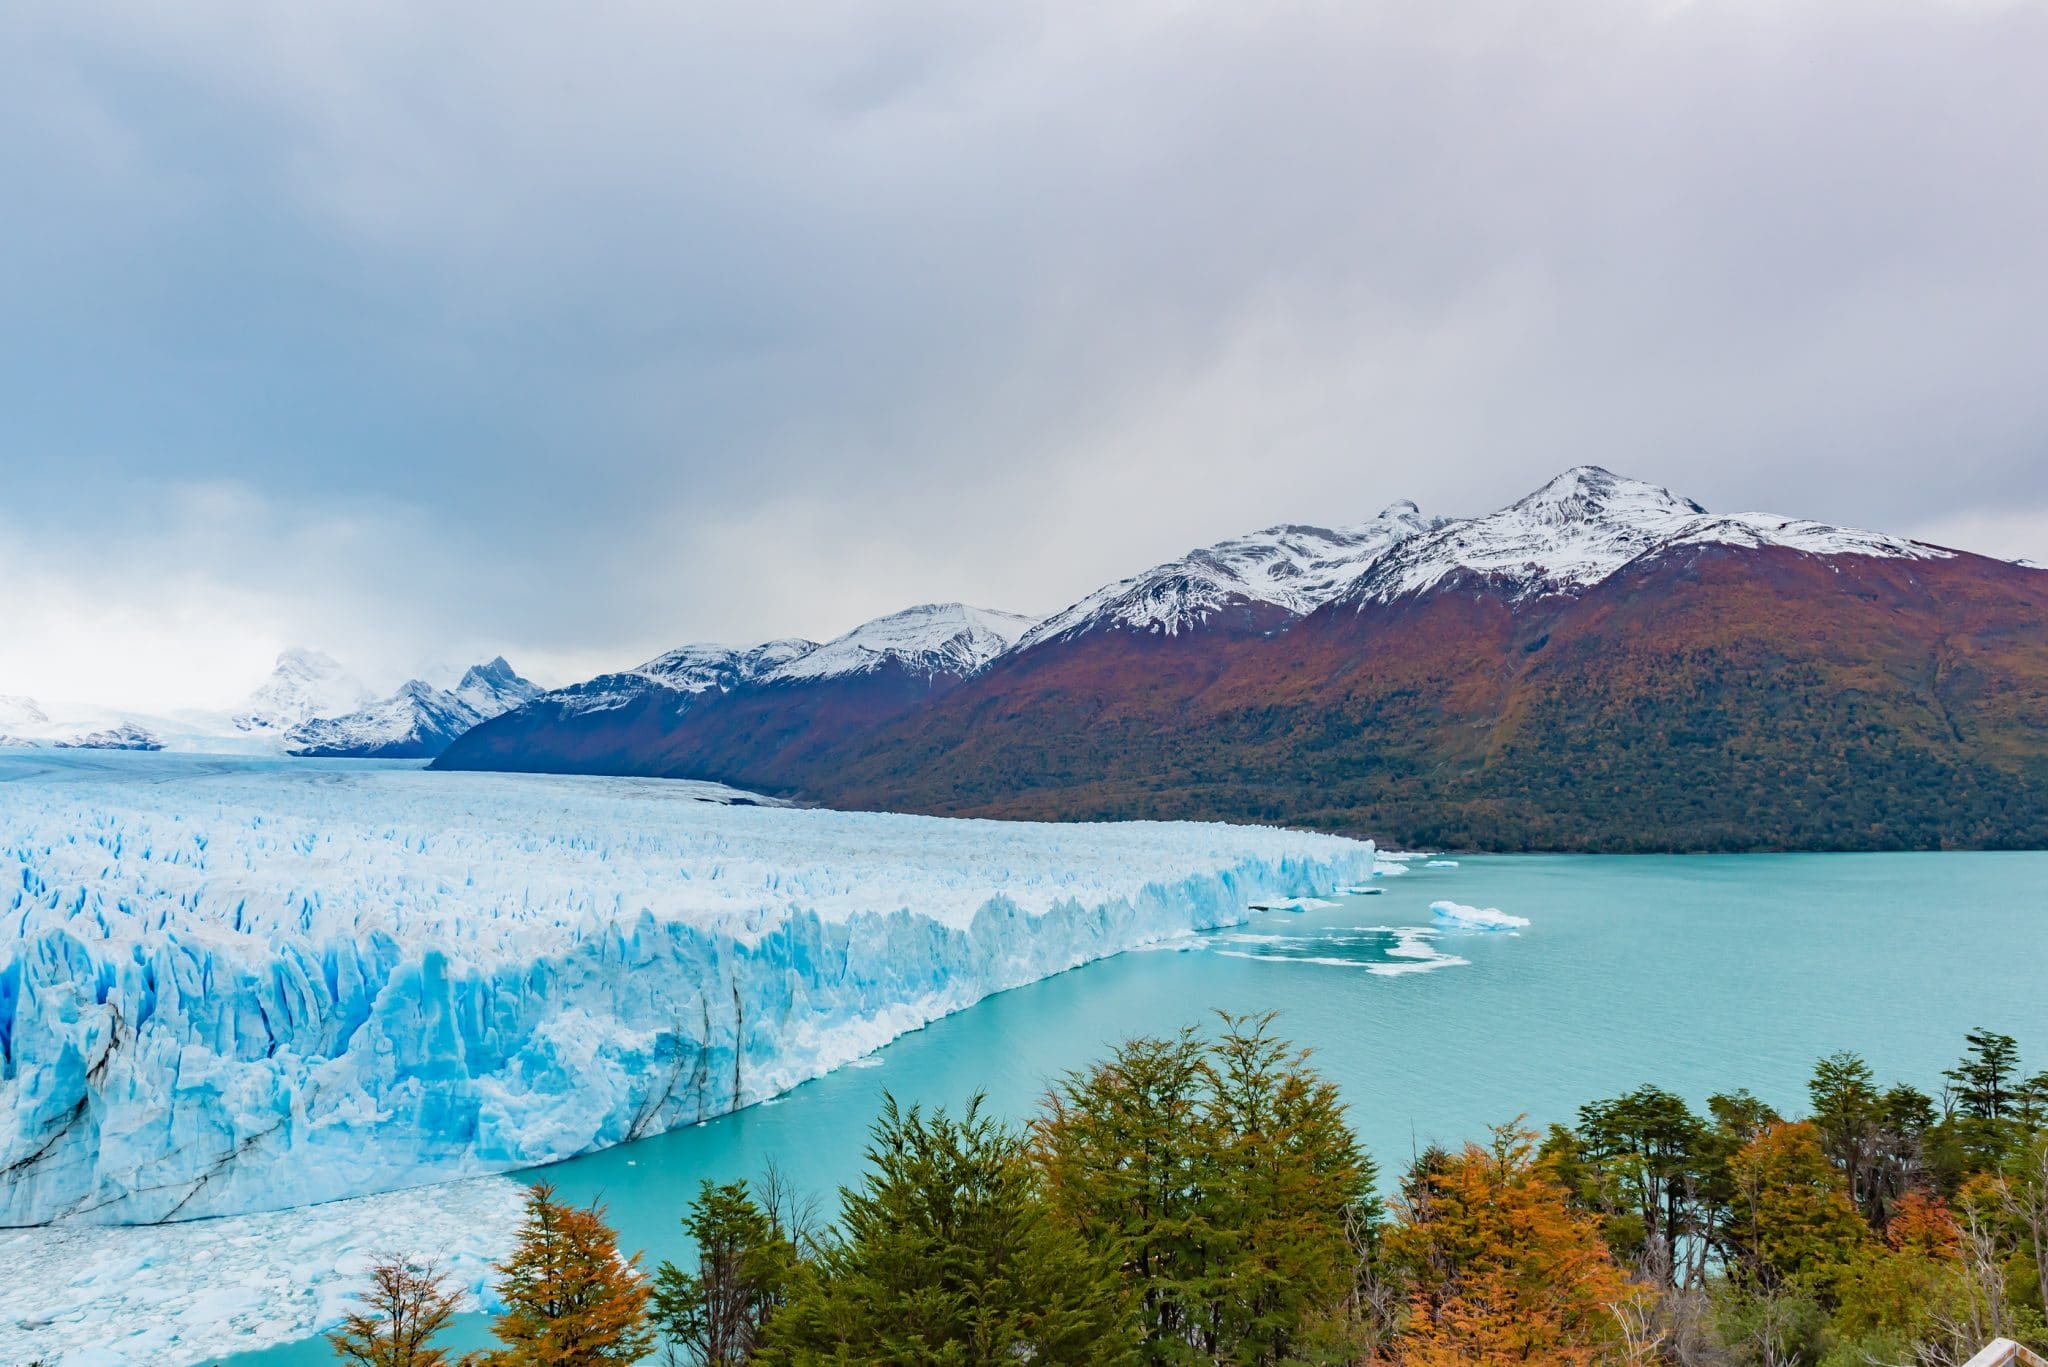 Perito Moreno Glacier in Patagonia, Argentina in autumn . The Perito Moreno Glacier is a glacier located in the Los Glaciares National Park in southwest Santa Cruz Province, Argentina. It is one of the most important tourist attractions in the Argentinian